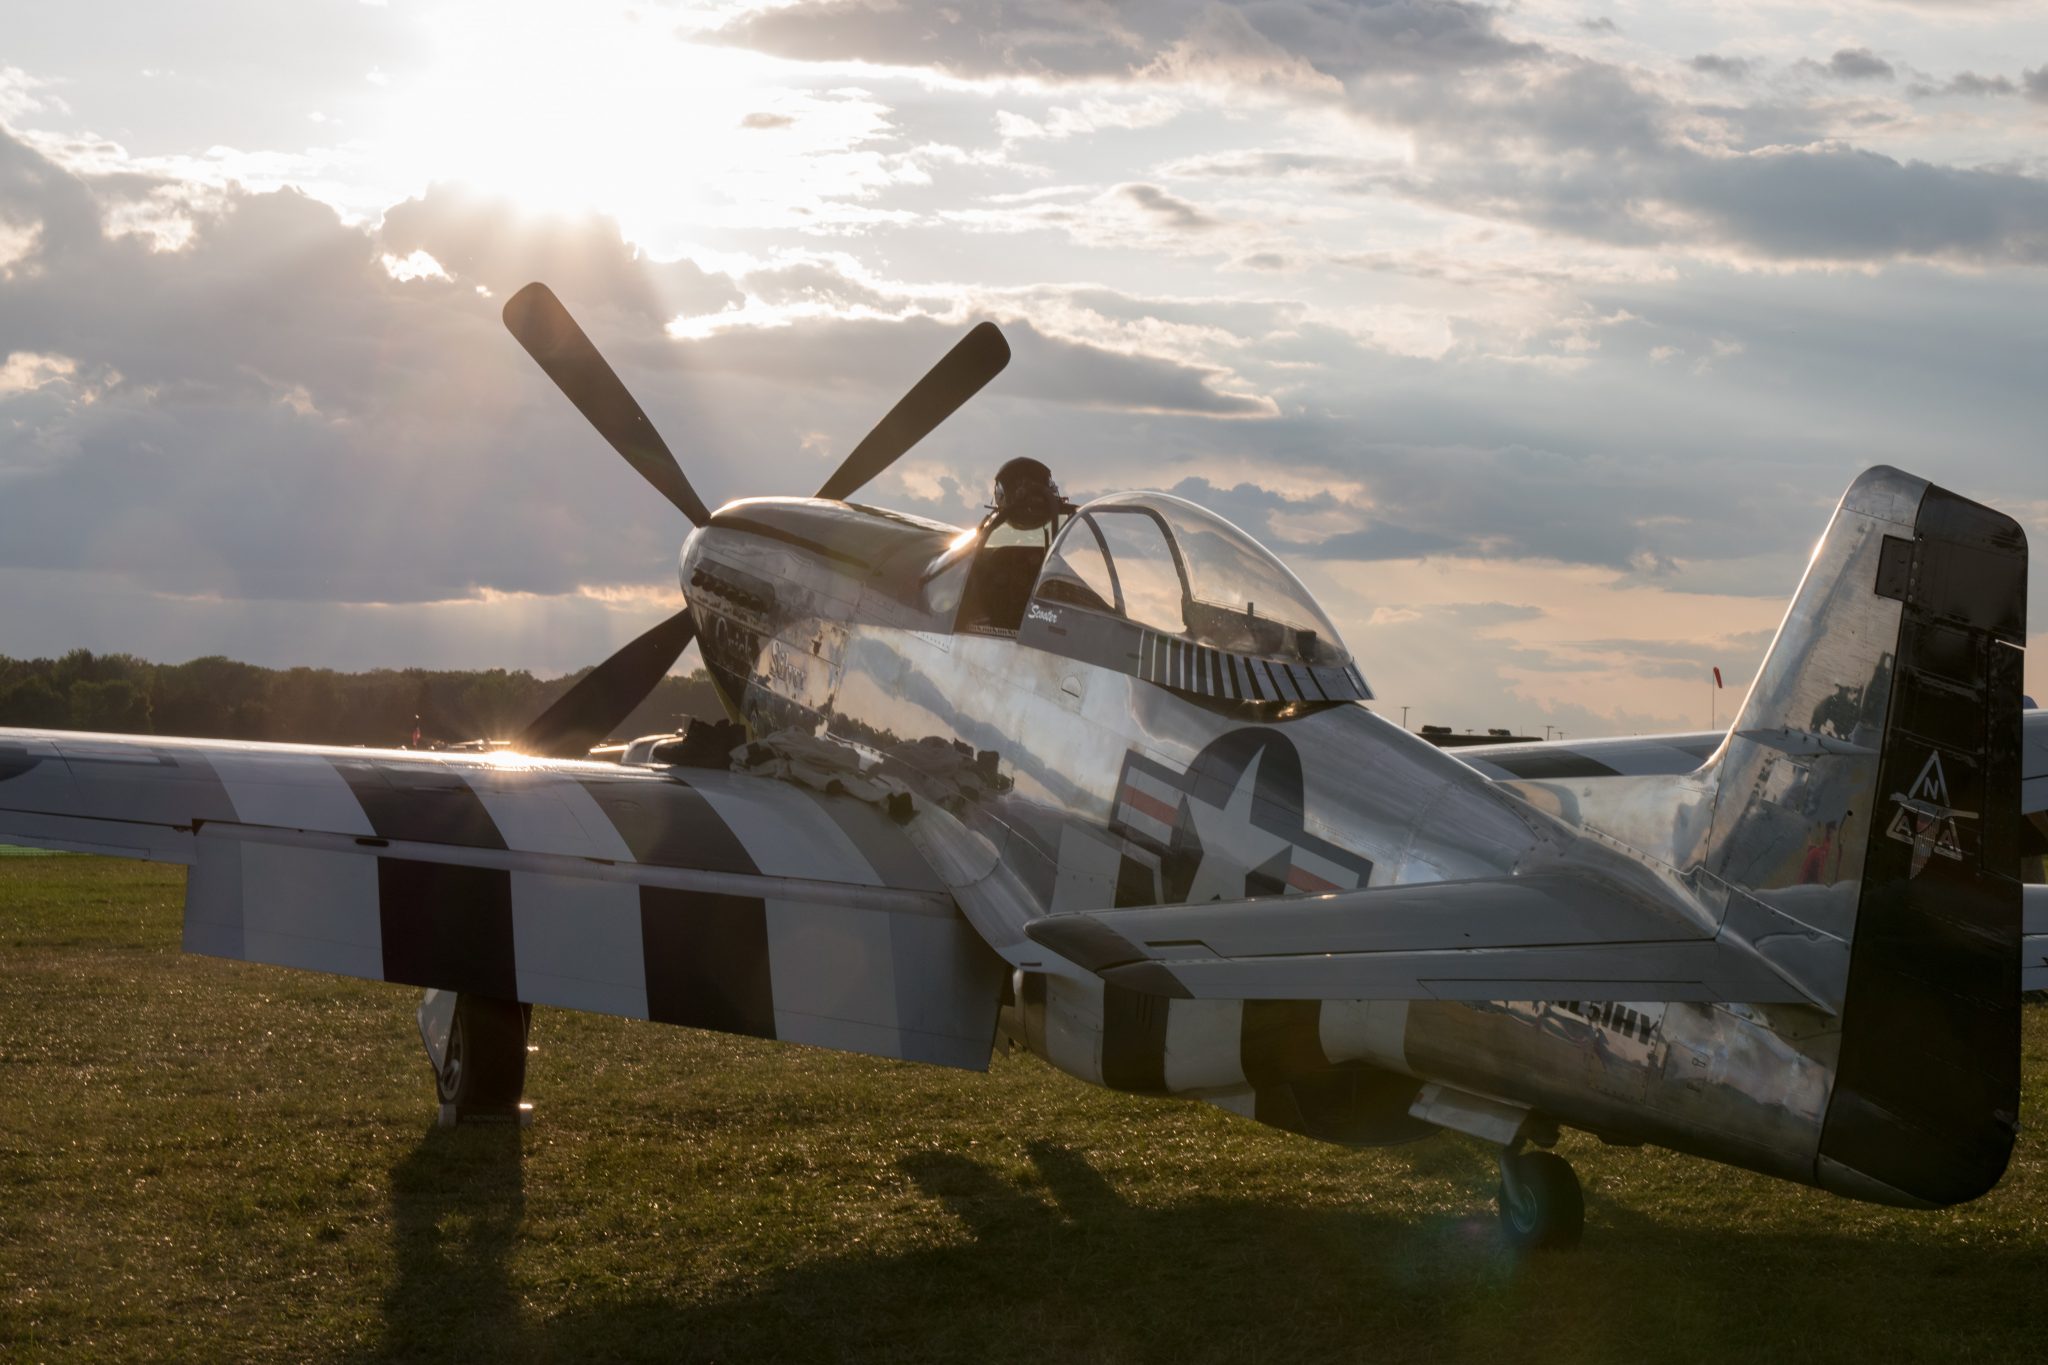 An old vintage plane sits in a grassy field at the EAA AirVenture air show. The sun shines through clouds in the sky across the horizon.